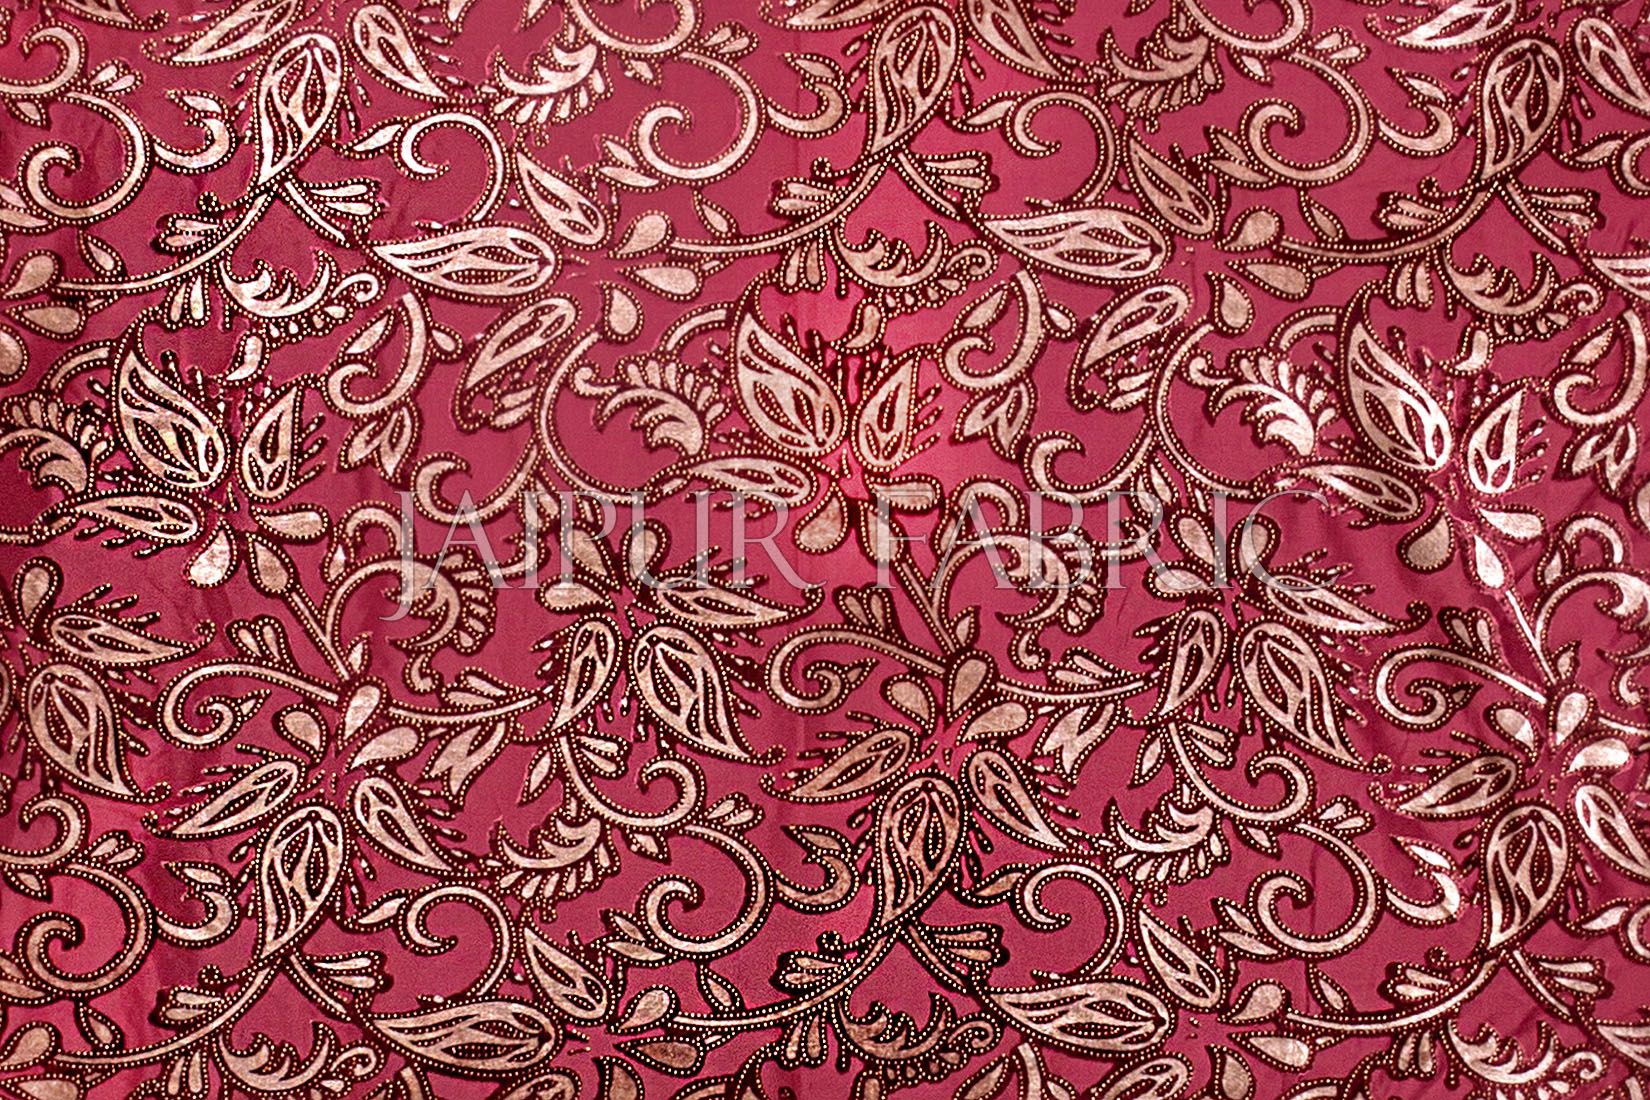 Maroon Base With Golden Patchwork Cotton Satin Double Bed Sheet